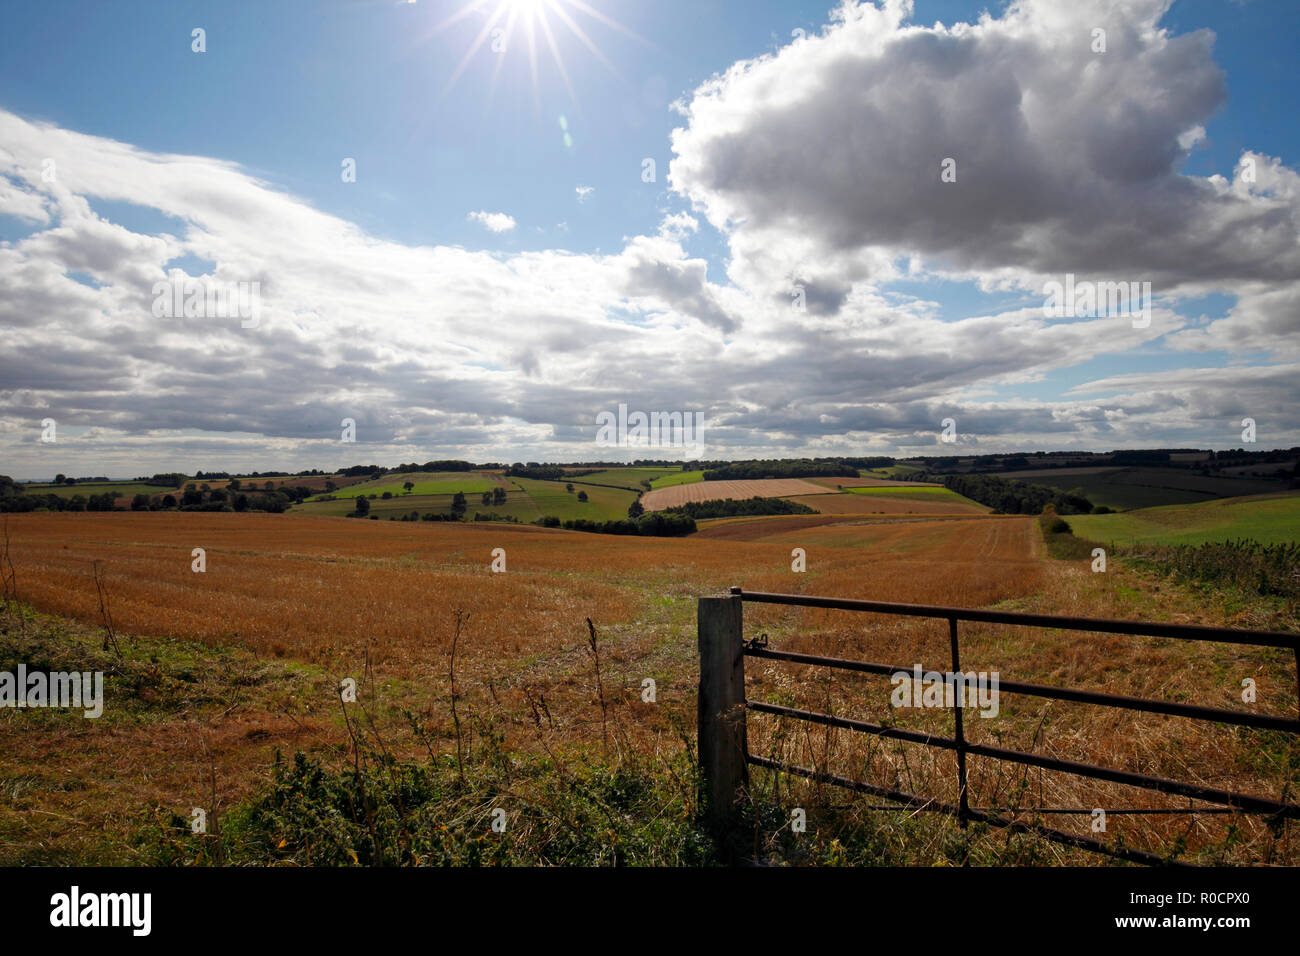 British countryside, country scene in the Cotswolds including a metal farm gate. Stock Photo